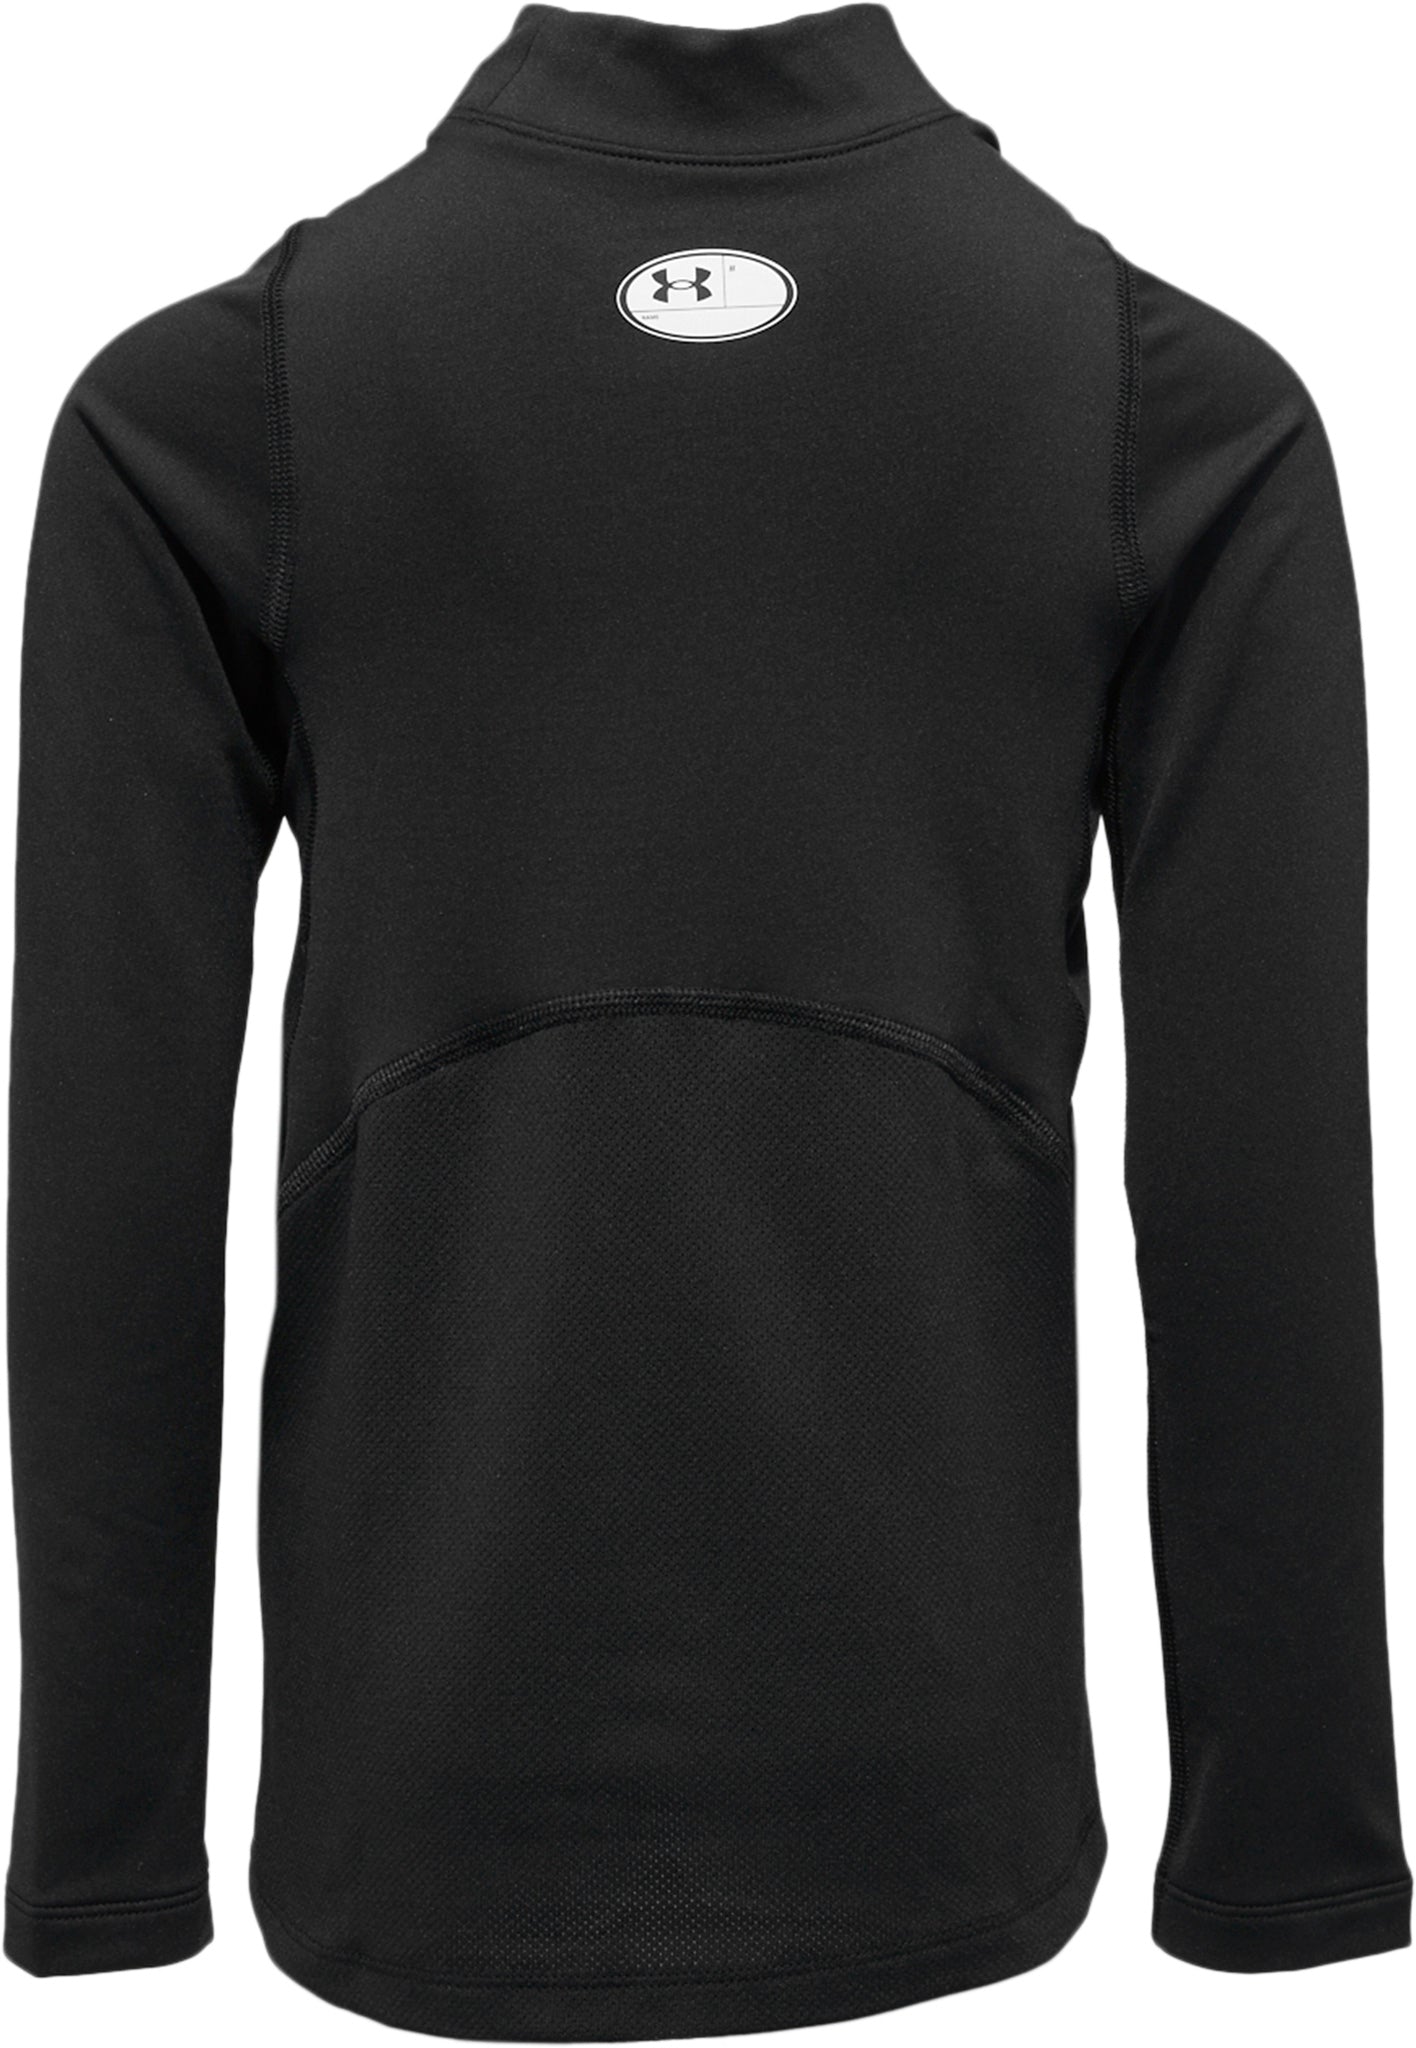 Under Armour Cold Gear Mock Long Sleeve - Youth